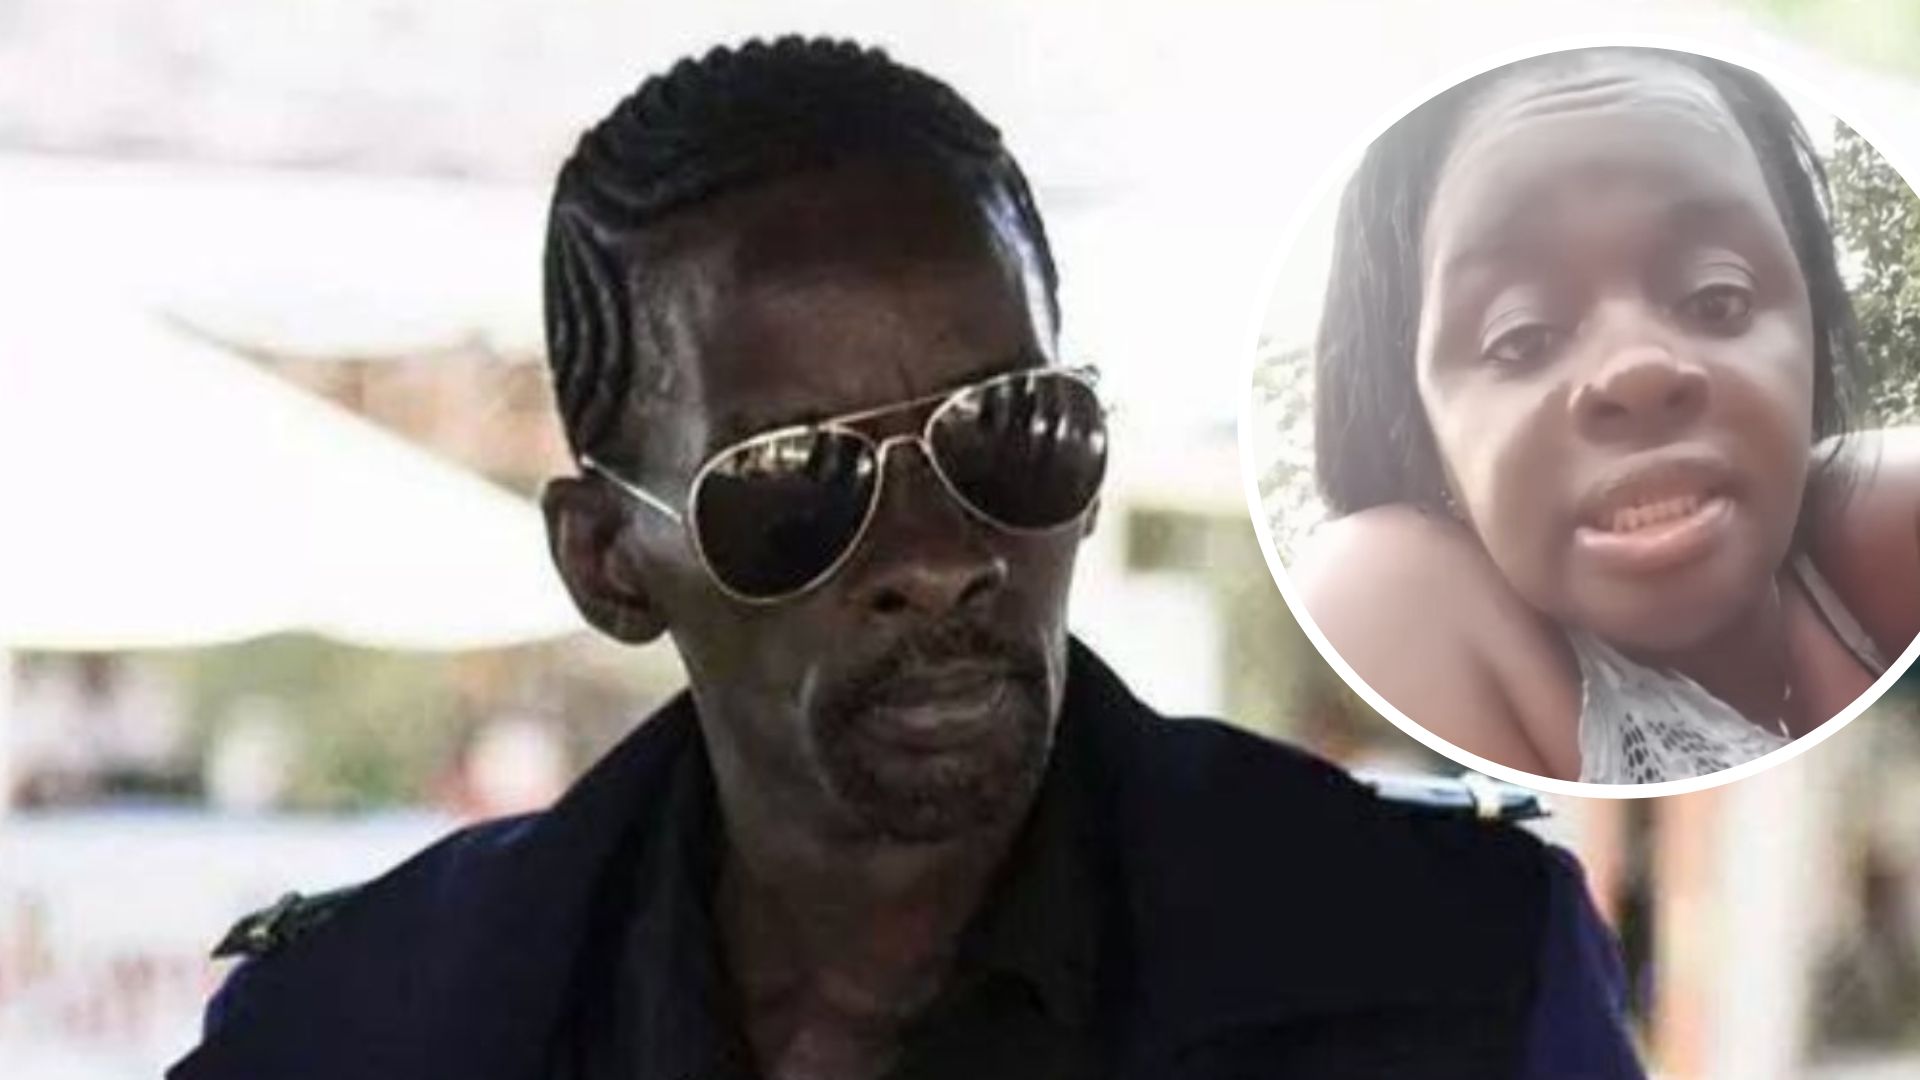 Gully Bop's Daugther Disses Him Without Pity Admist His Health Scare, Says Her Dad Doesn't Have Any 